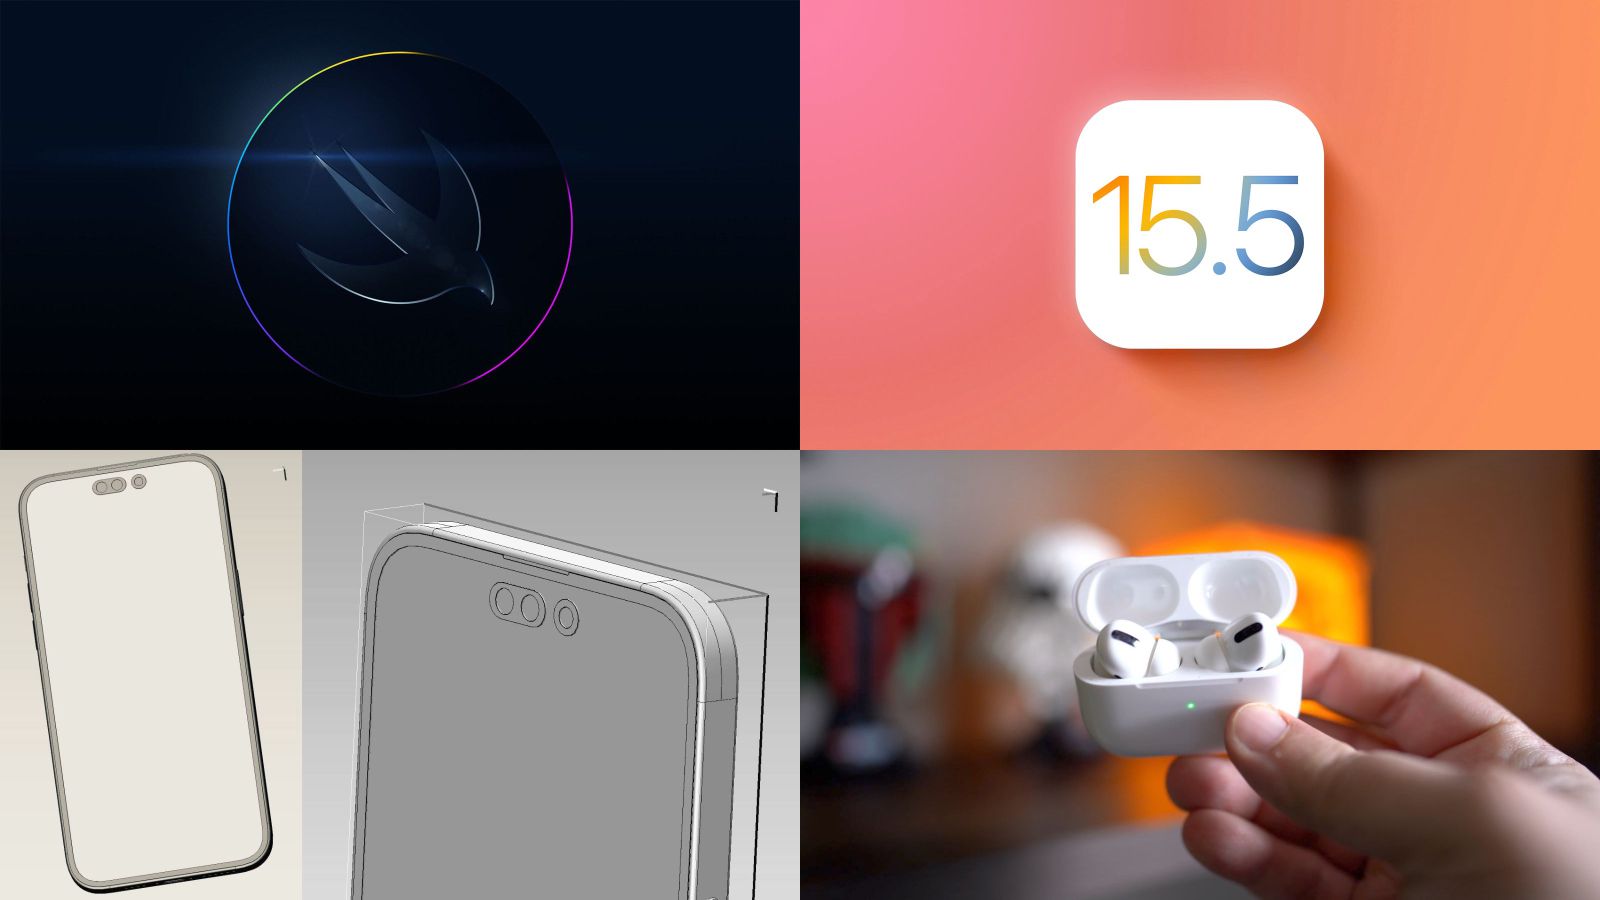 Top Stories: WWDC Announced, iOS 15.5 Beta, iPhone 14 Pro Rumors, and More